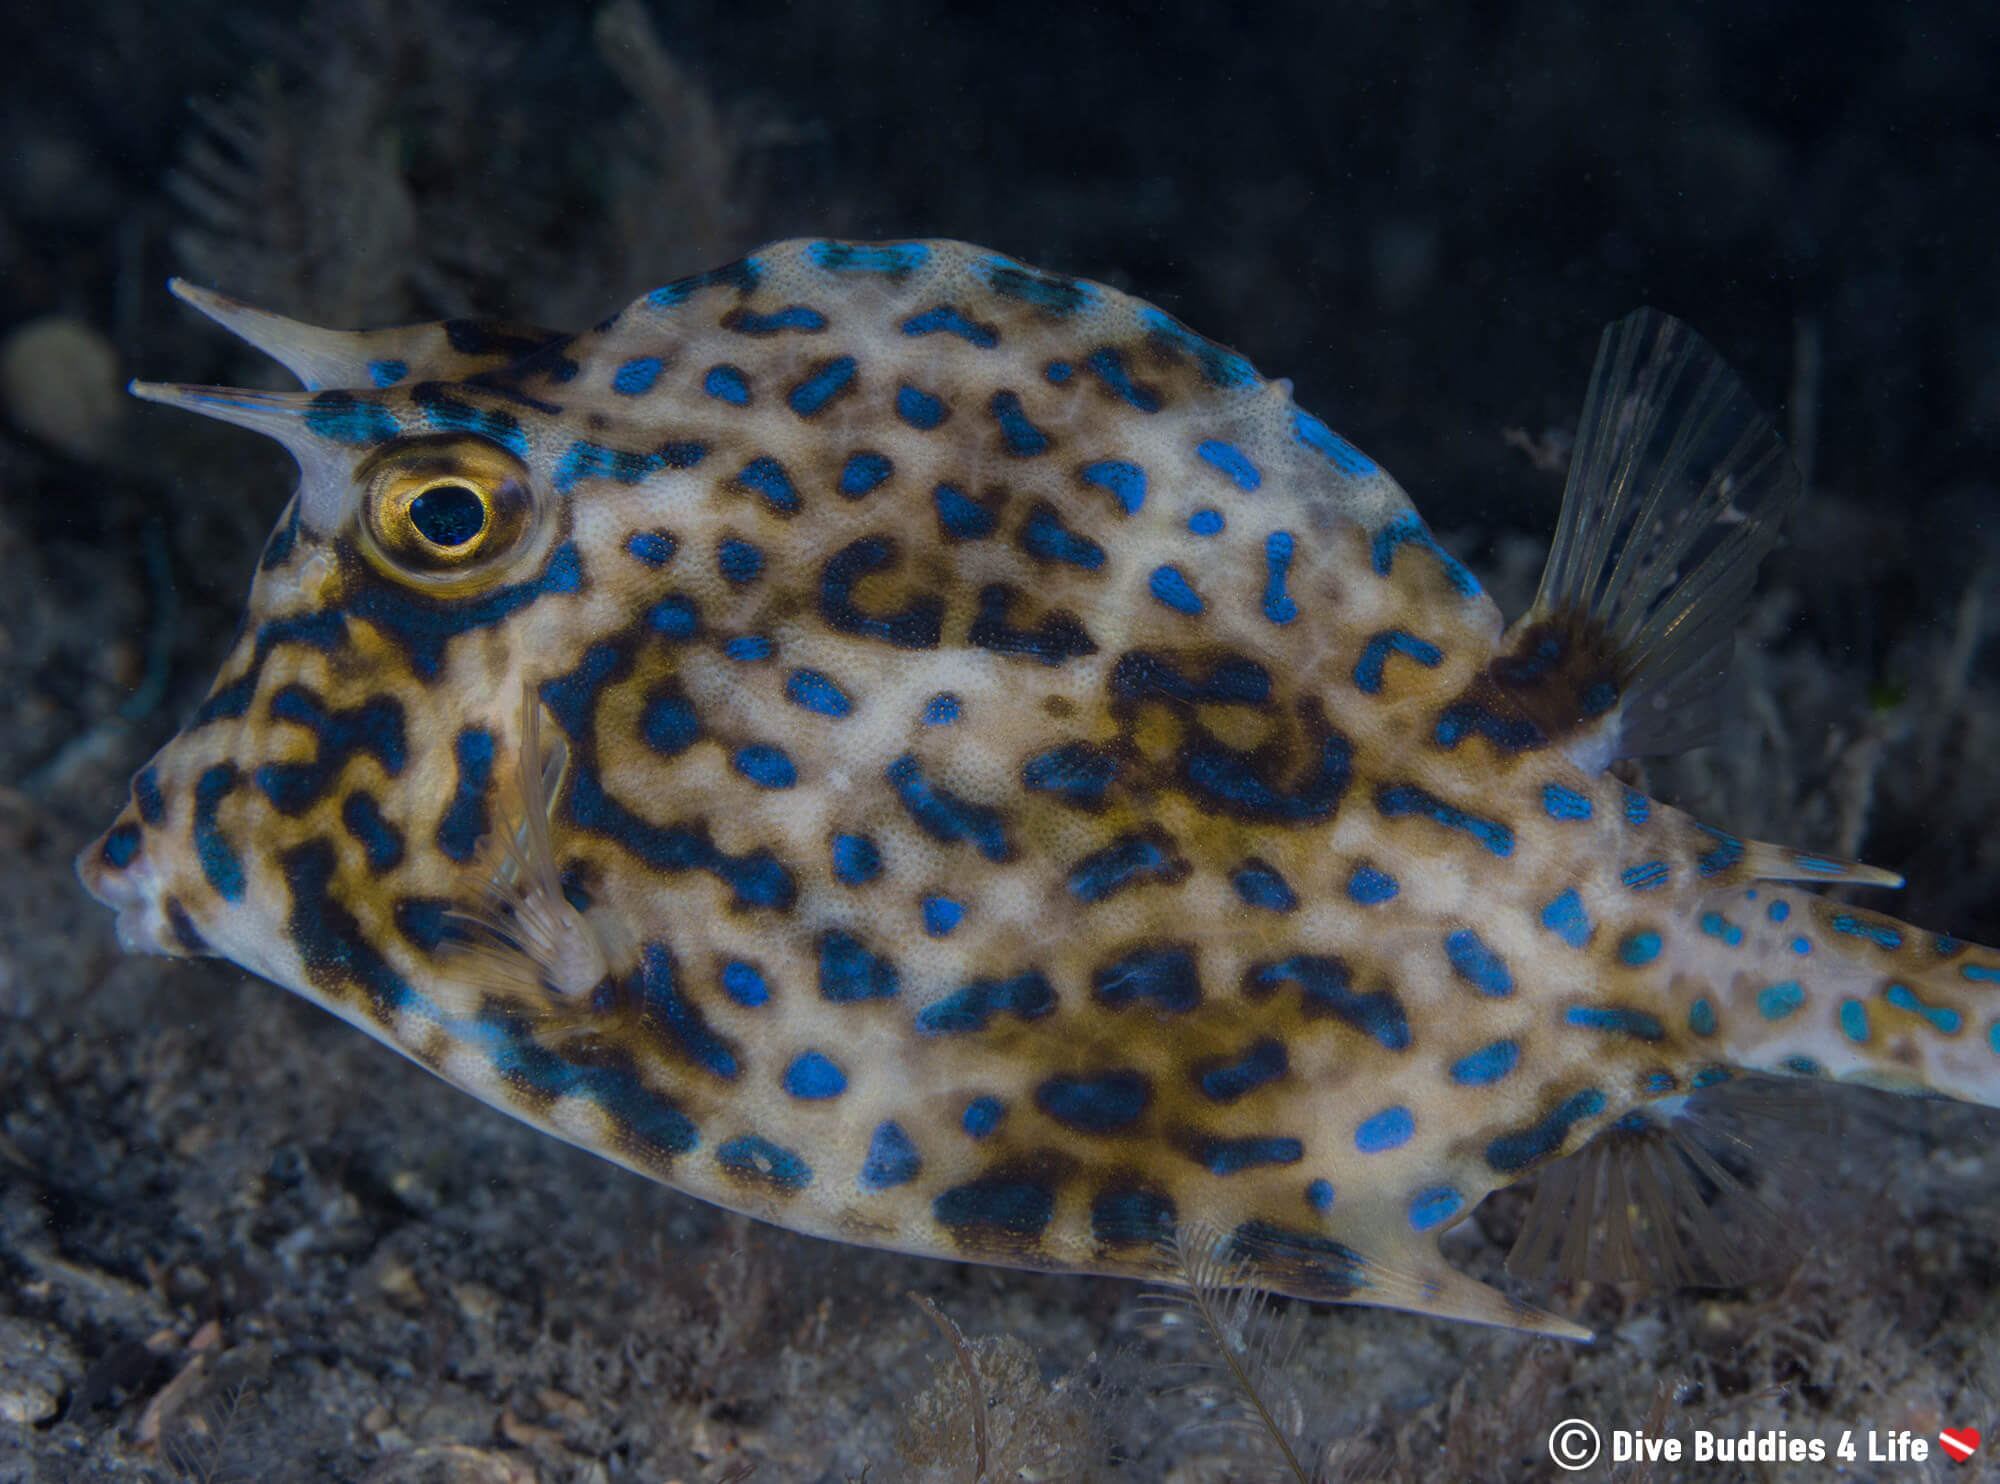 A Timid Cowfish On Our Night Dive At Blue Heron Bridge, Florida